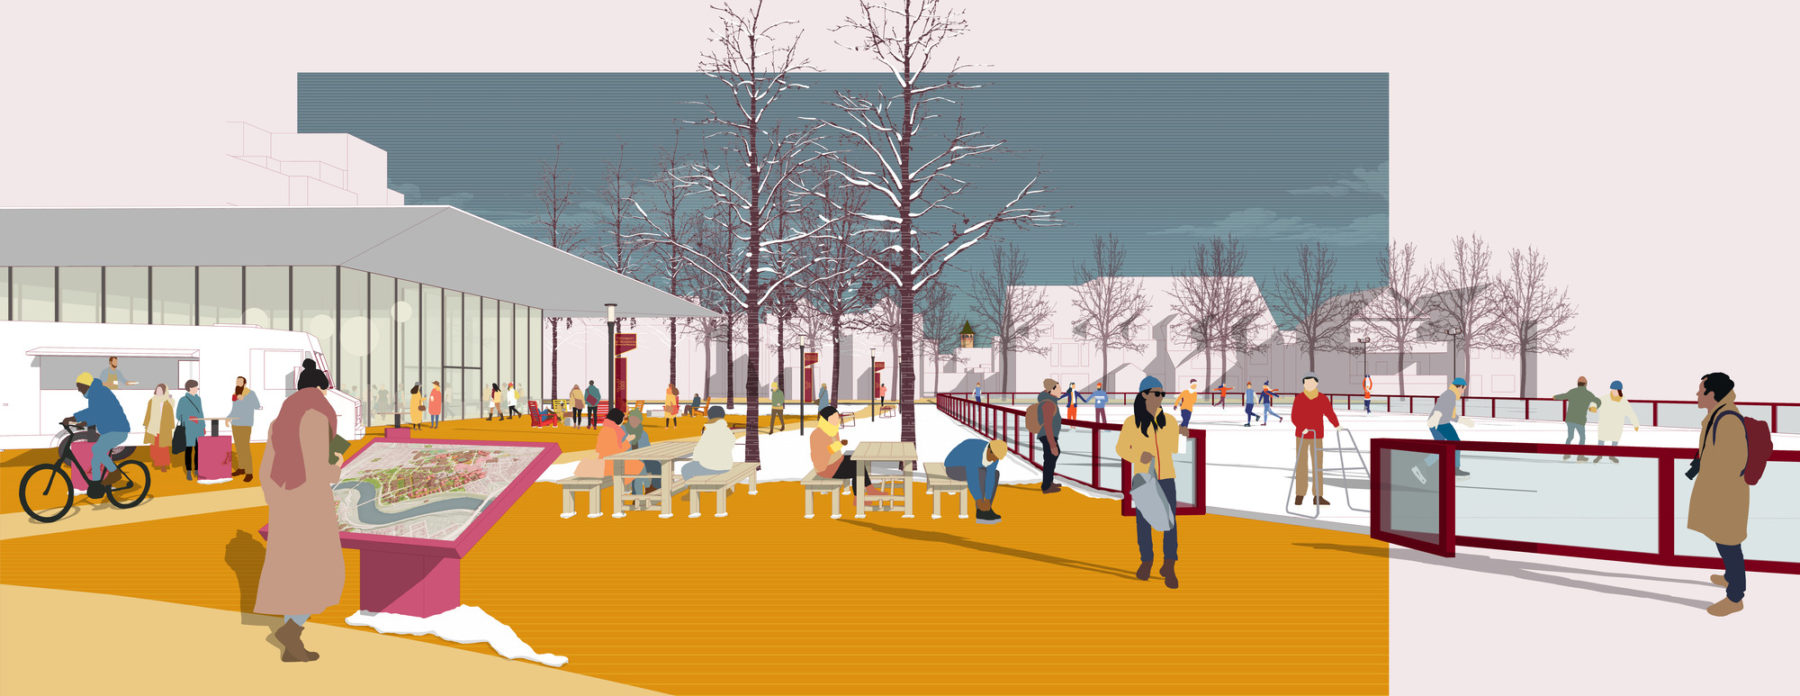 graphic rendering of a snowy plaza